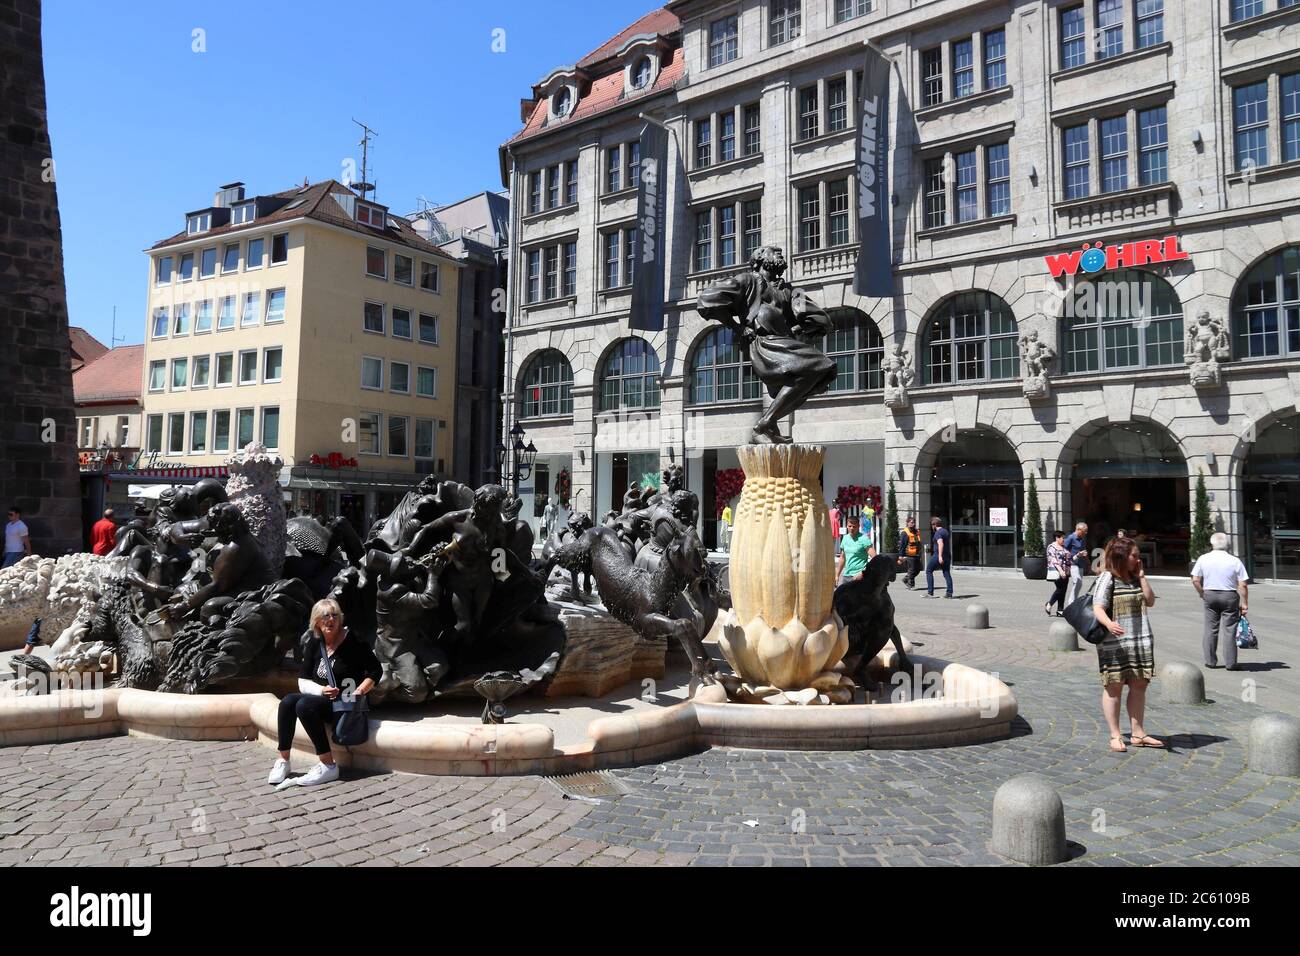 NUREMBERG, GERMANY - MAY 8, 2018: People visit Ehekarussell controversial fountain at Ludwigsplatz (Ludwig Square) shopping area in Nuremberg Old Town Stock Photo